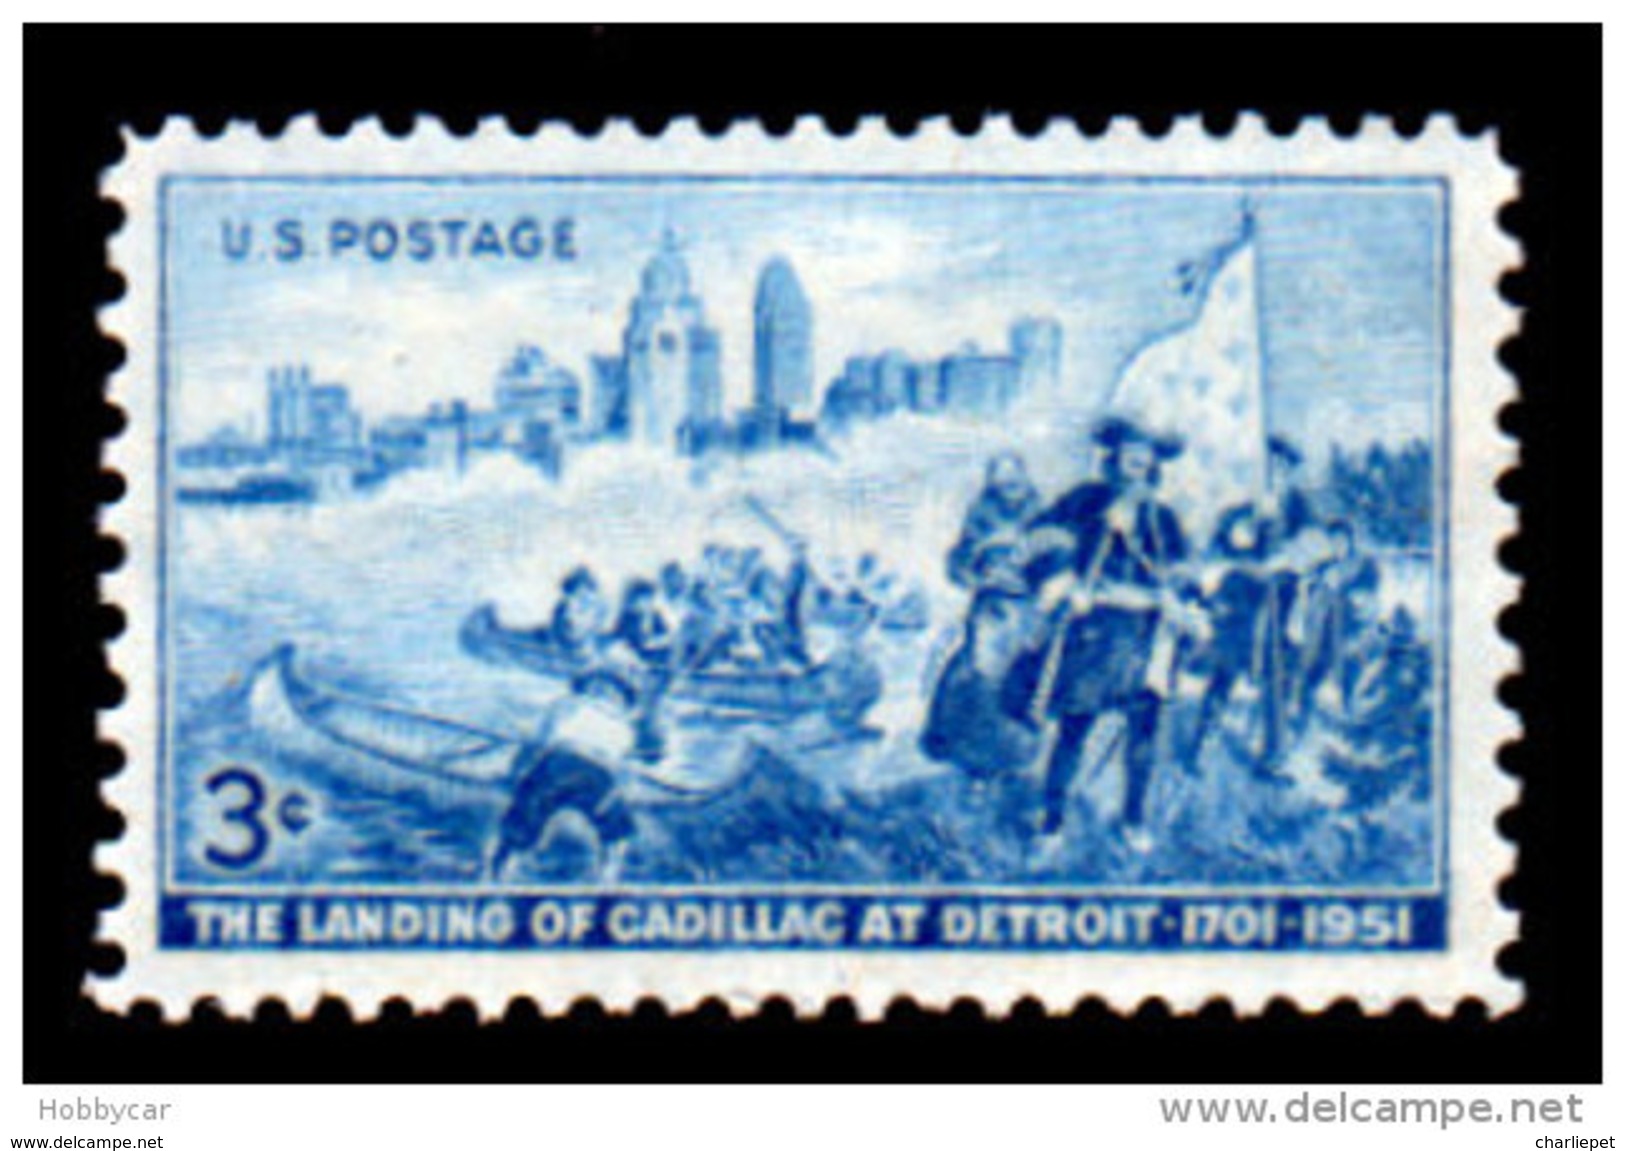 United States  1951, Scott # 1000, Cadillac Landining In Detroit , 3c MNH This Is A Stock Photo - Unused Stamps